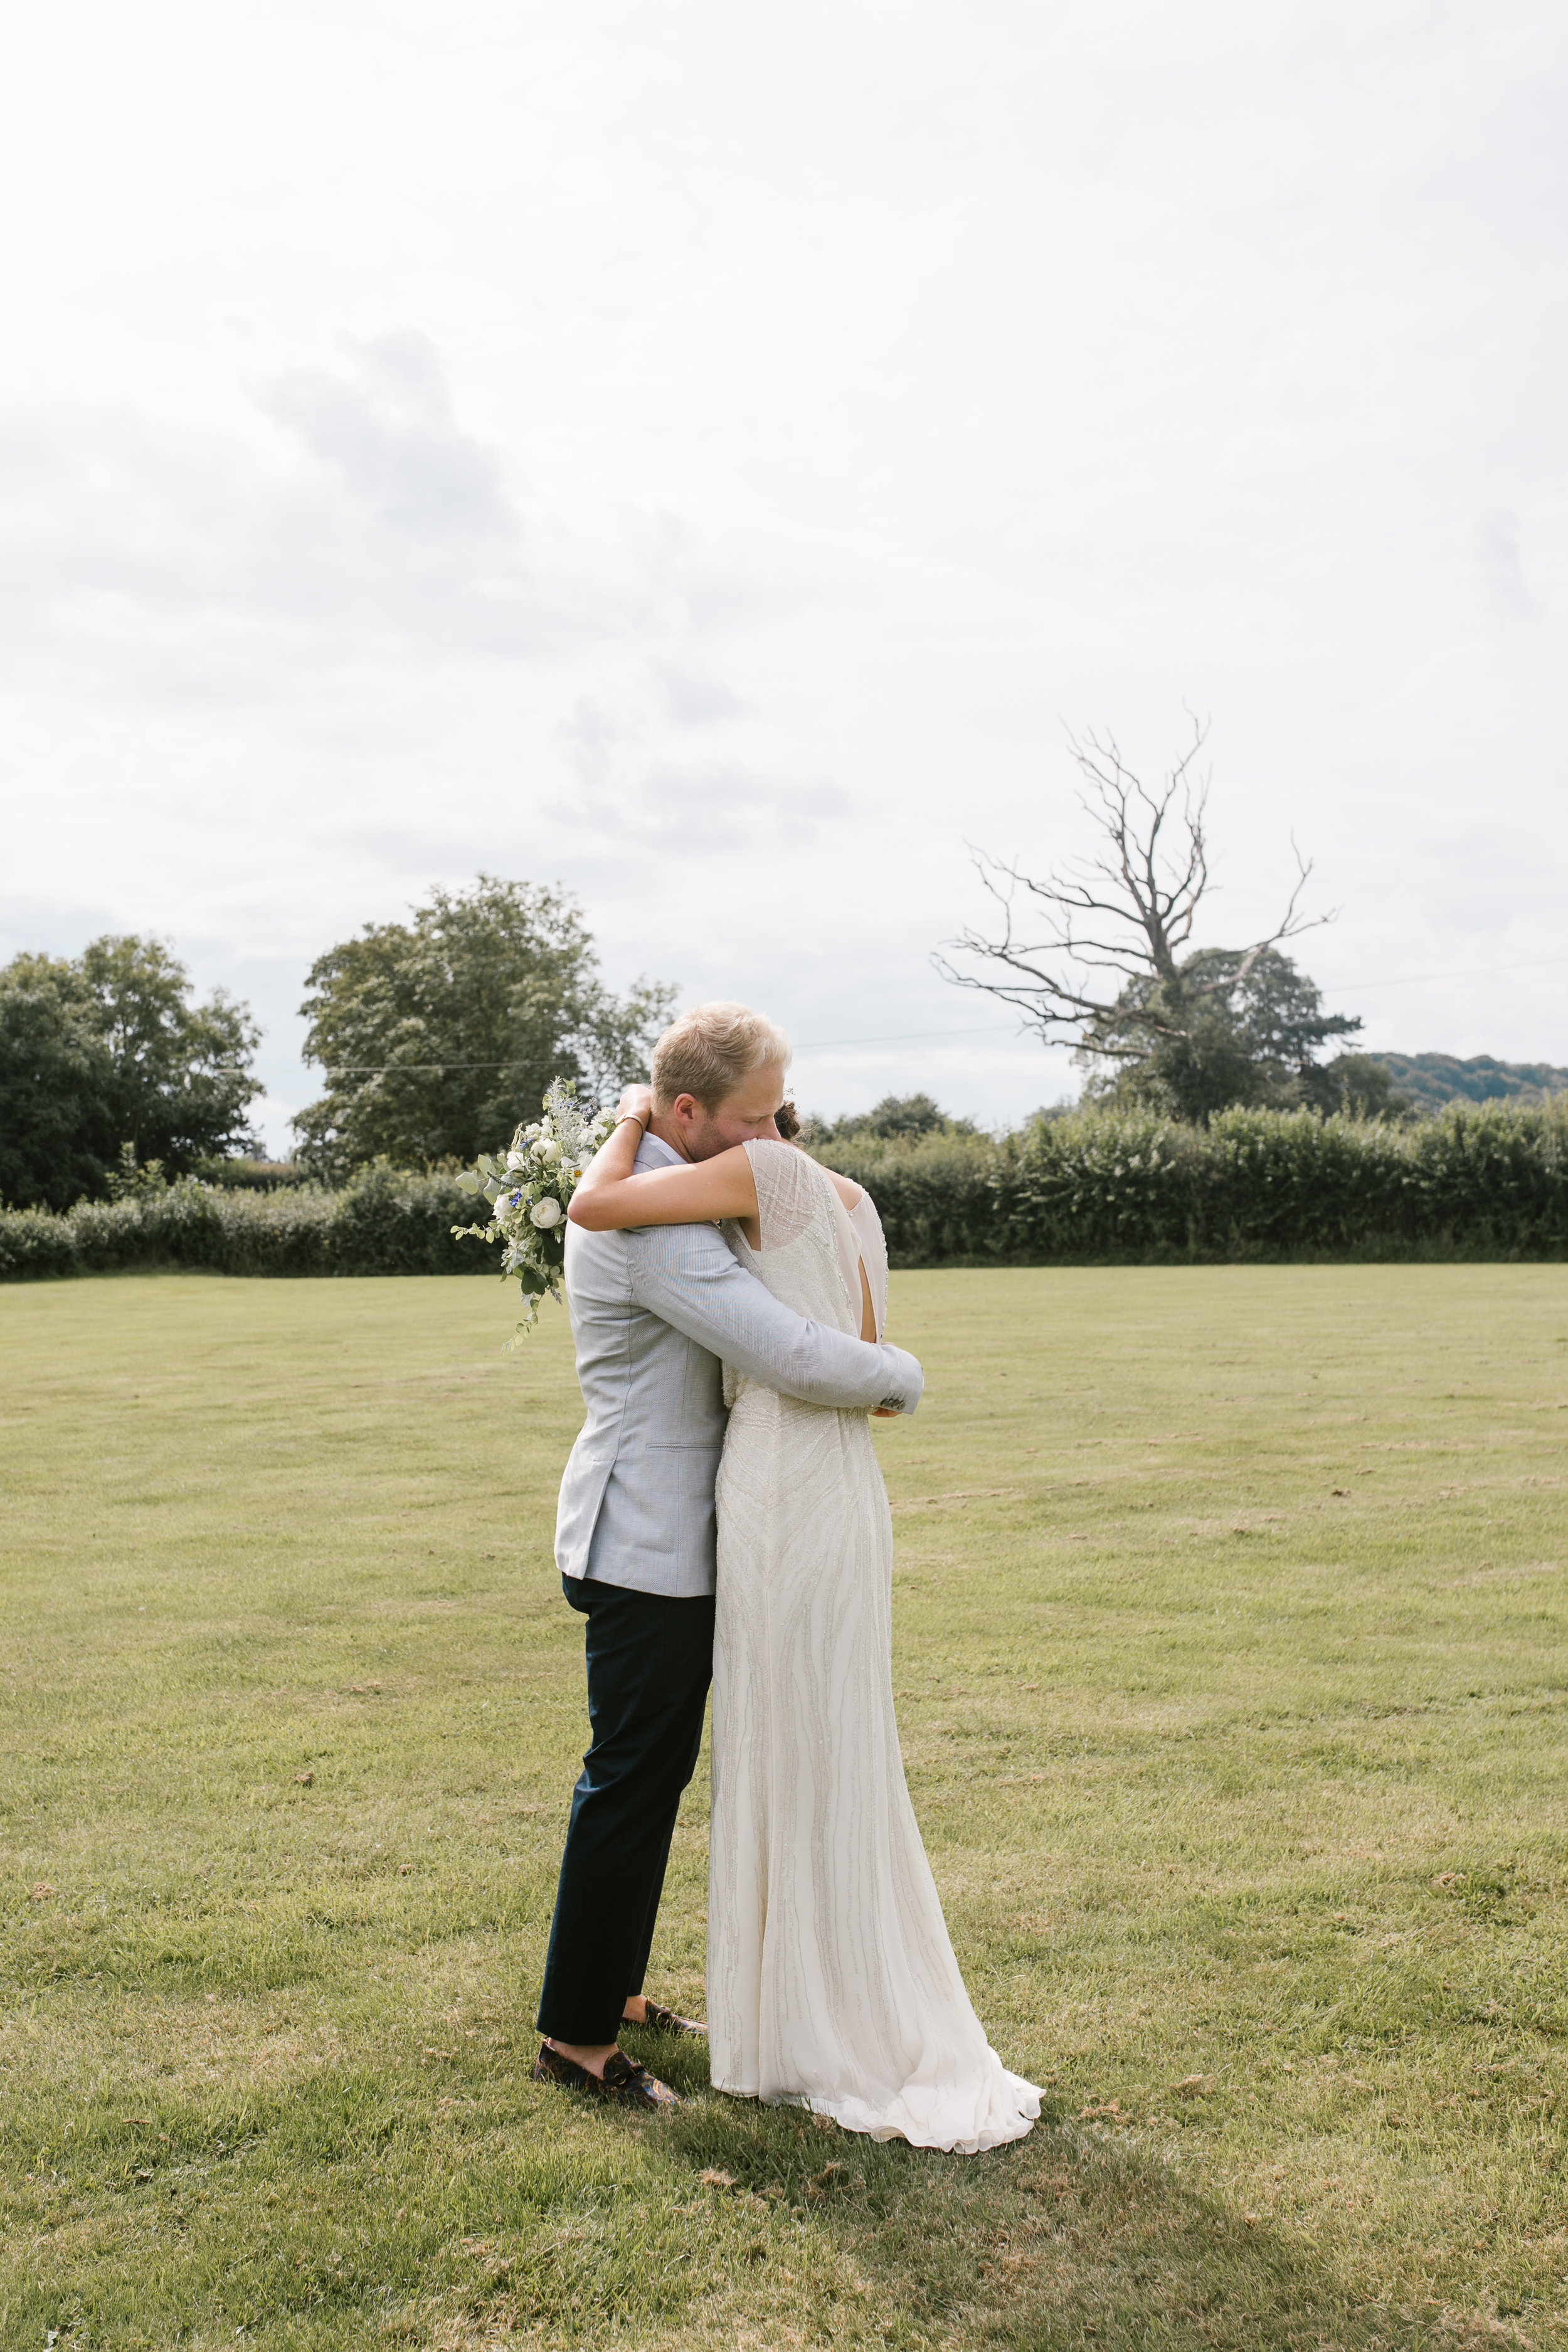 natural photo of bride and groom hugging after their outdoor wedding ceremony